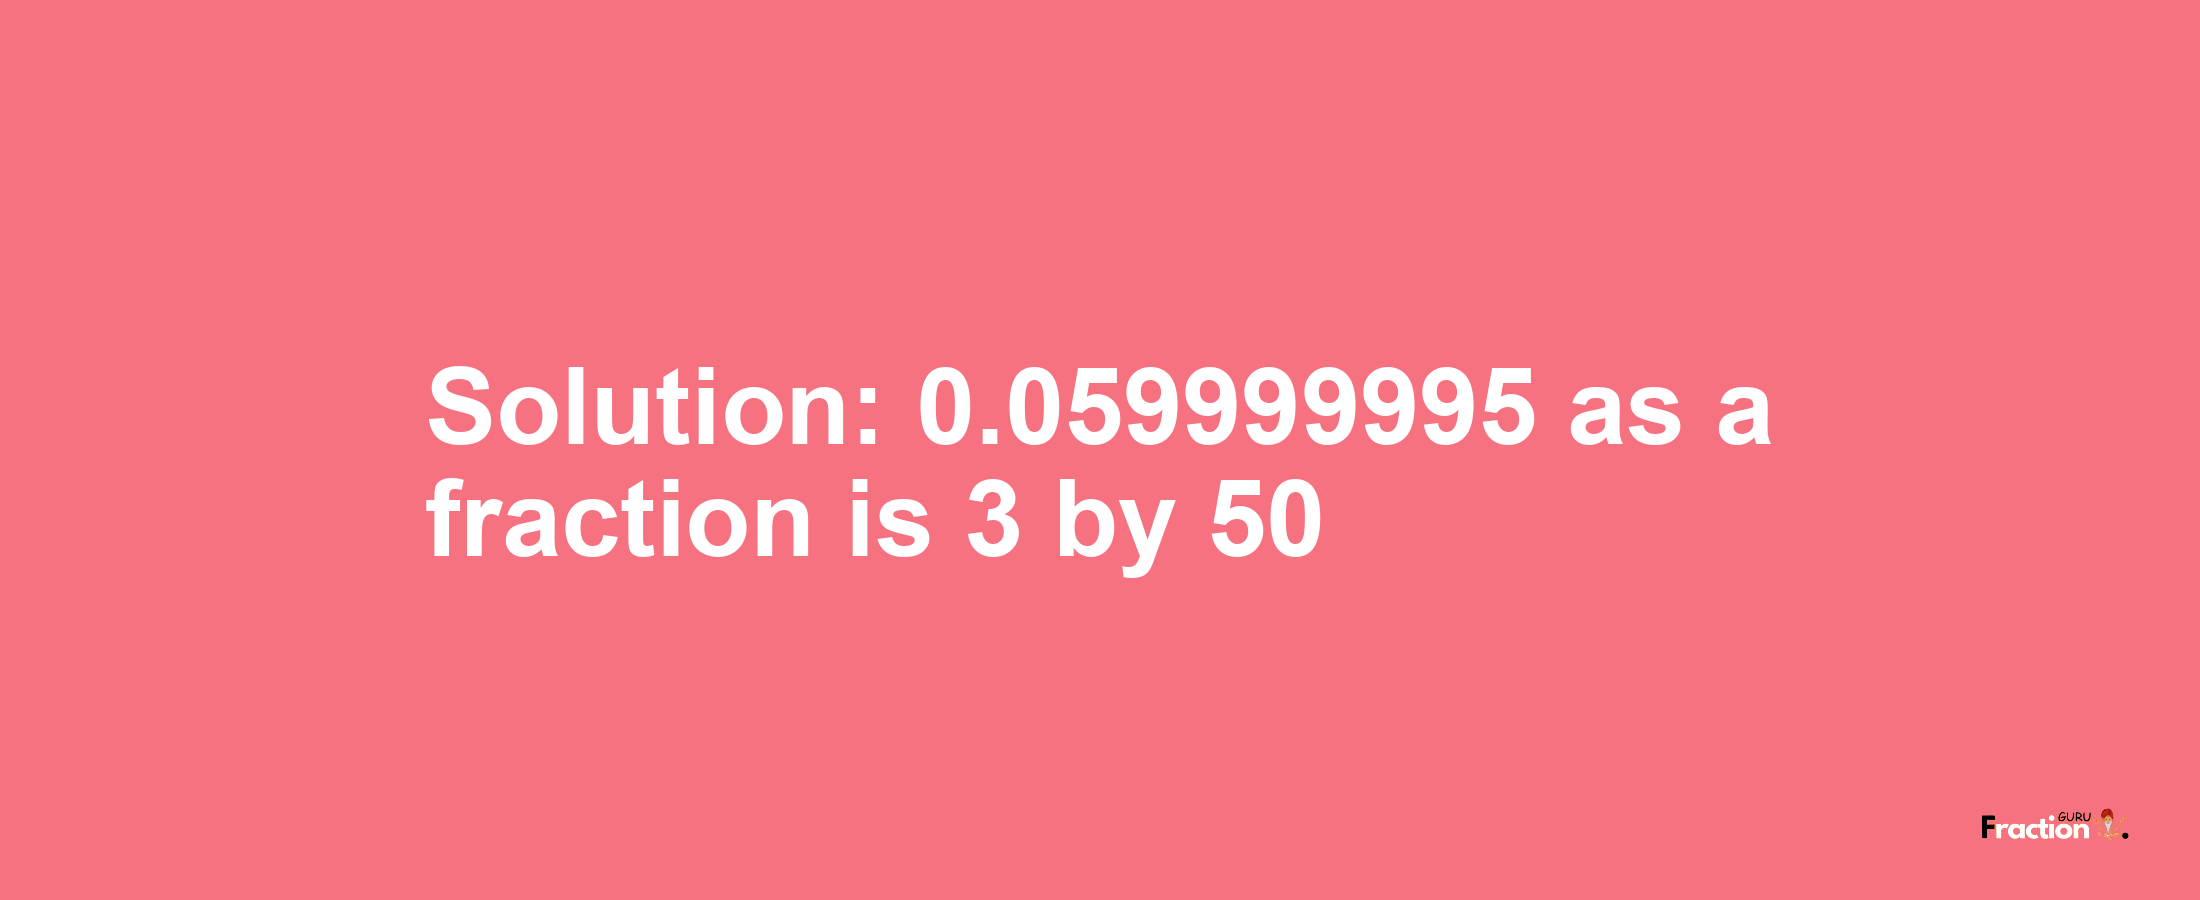 Solution:0.059999995 as a fraction is 3/50